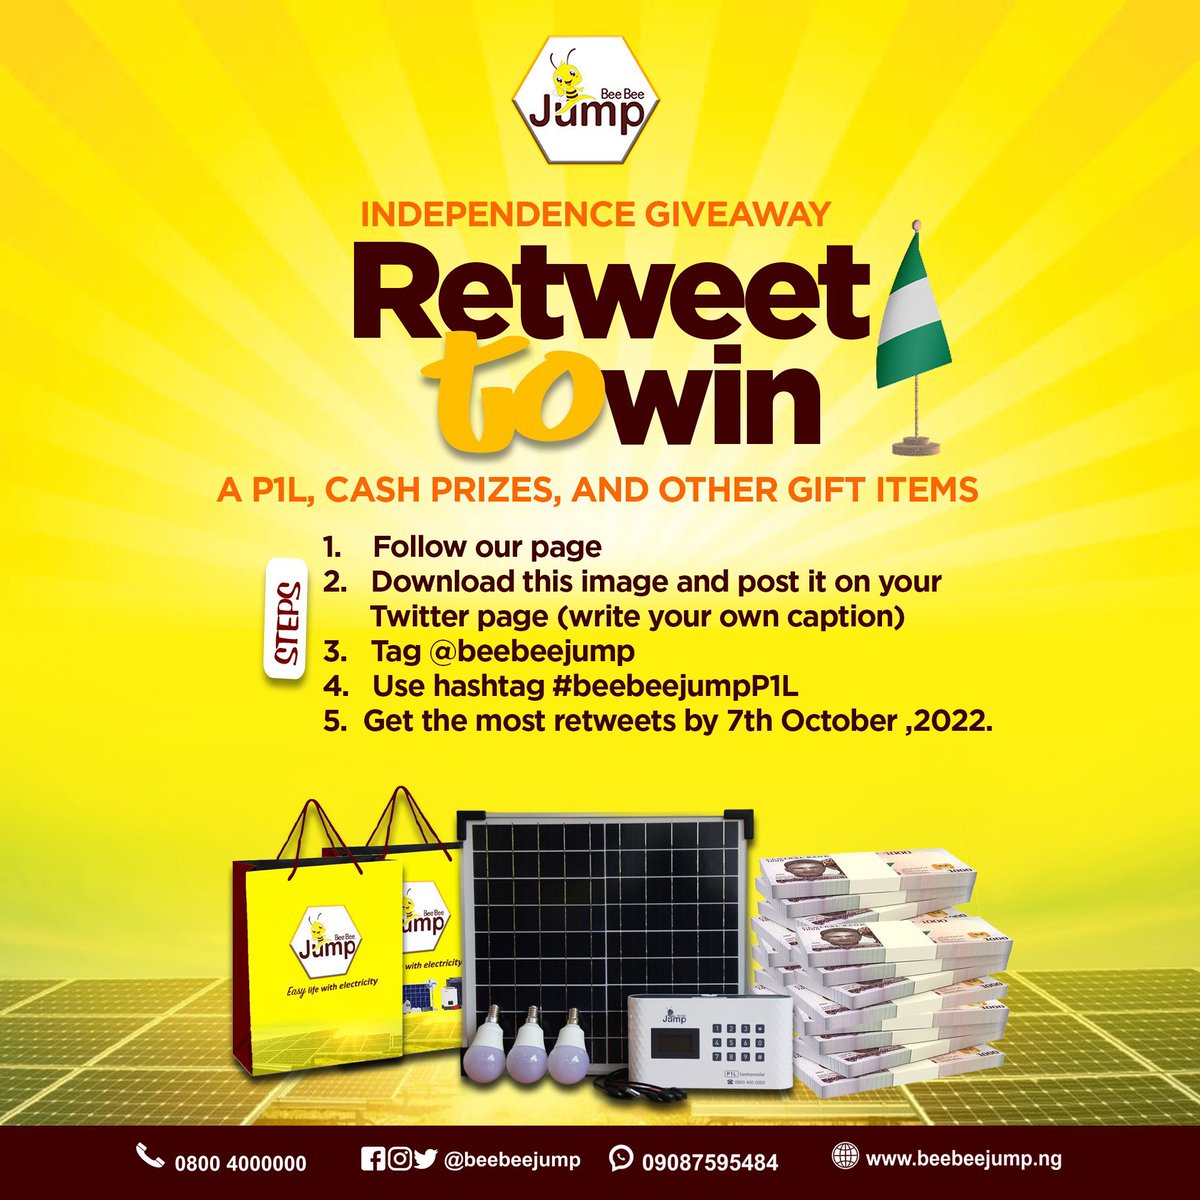 Avoid paying high electricity bills by switching to solar energy today ! @beebeejump got you covered! Send them a DM #beebeejumpP1L I would truly appreciate if you RETWEET this tweet. God bless you richly.